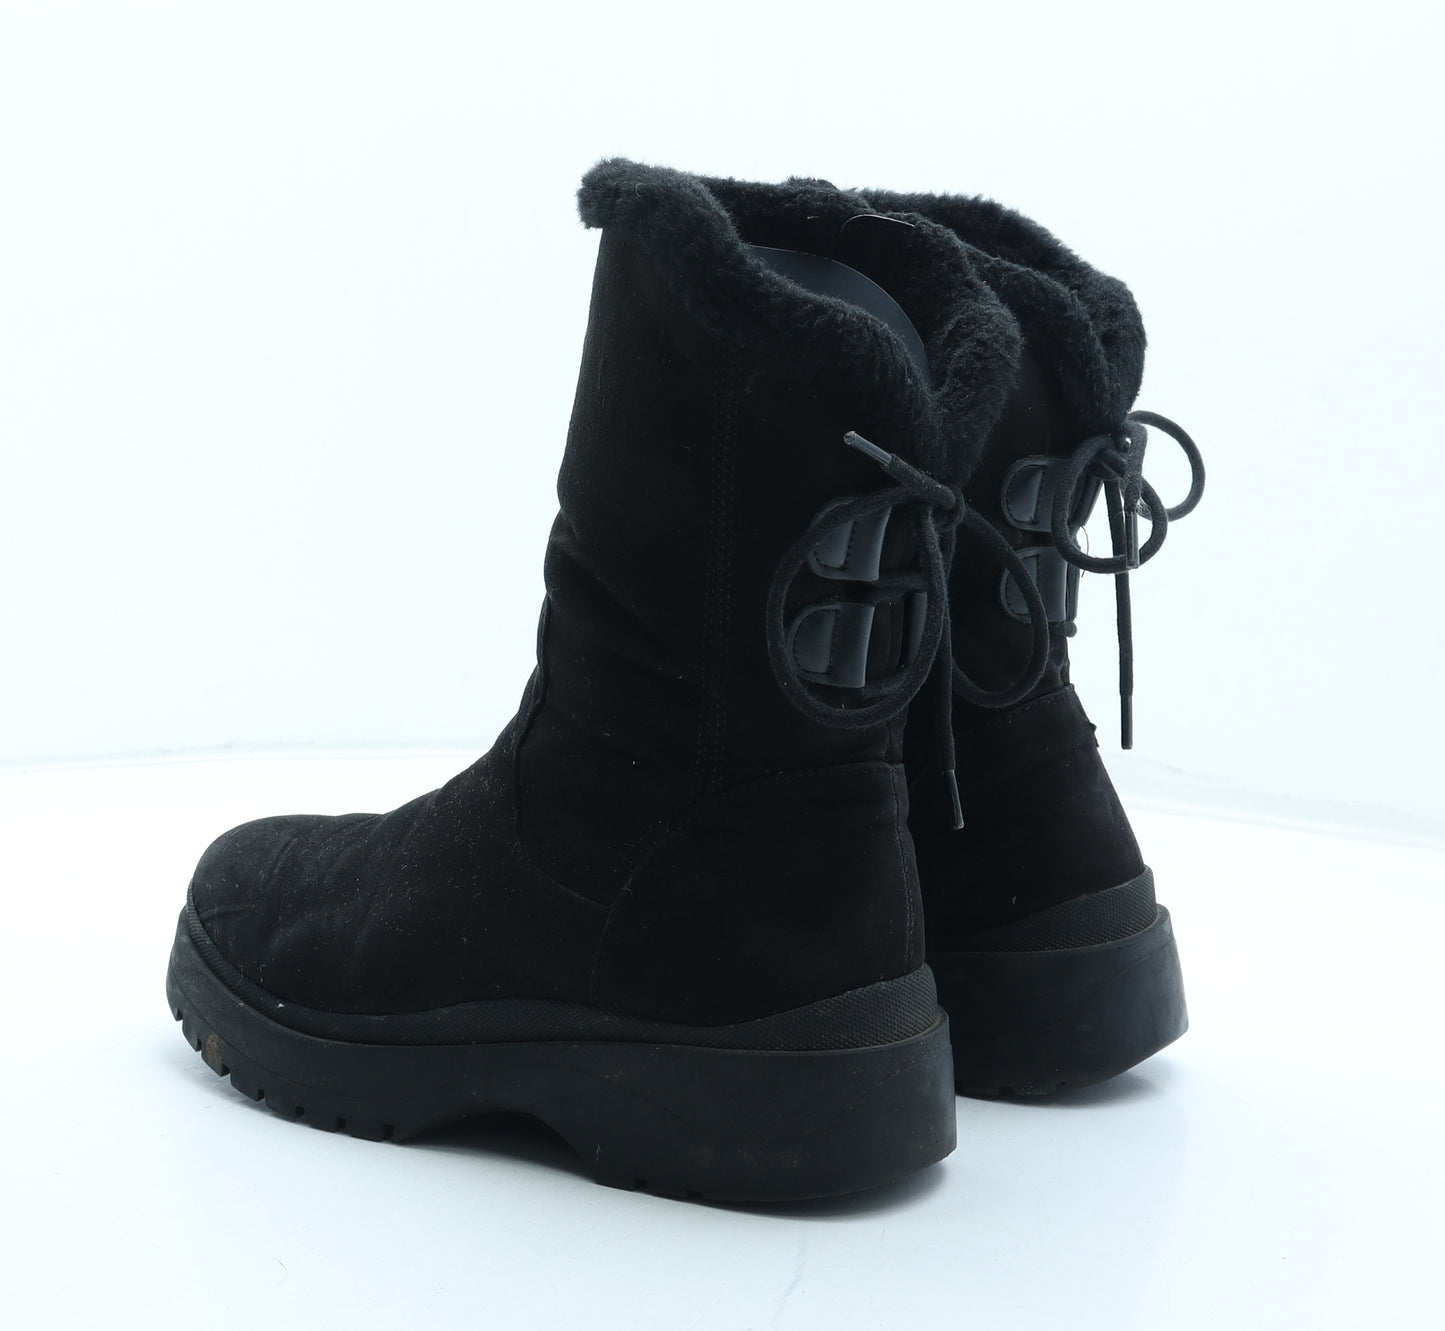 F&F Womens Black Polyester Shearling Style Boot UK